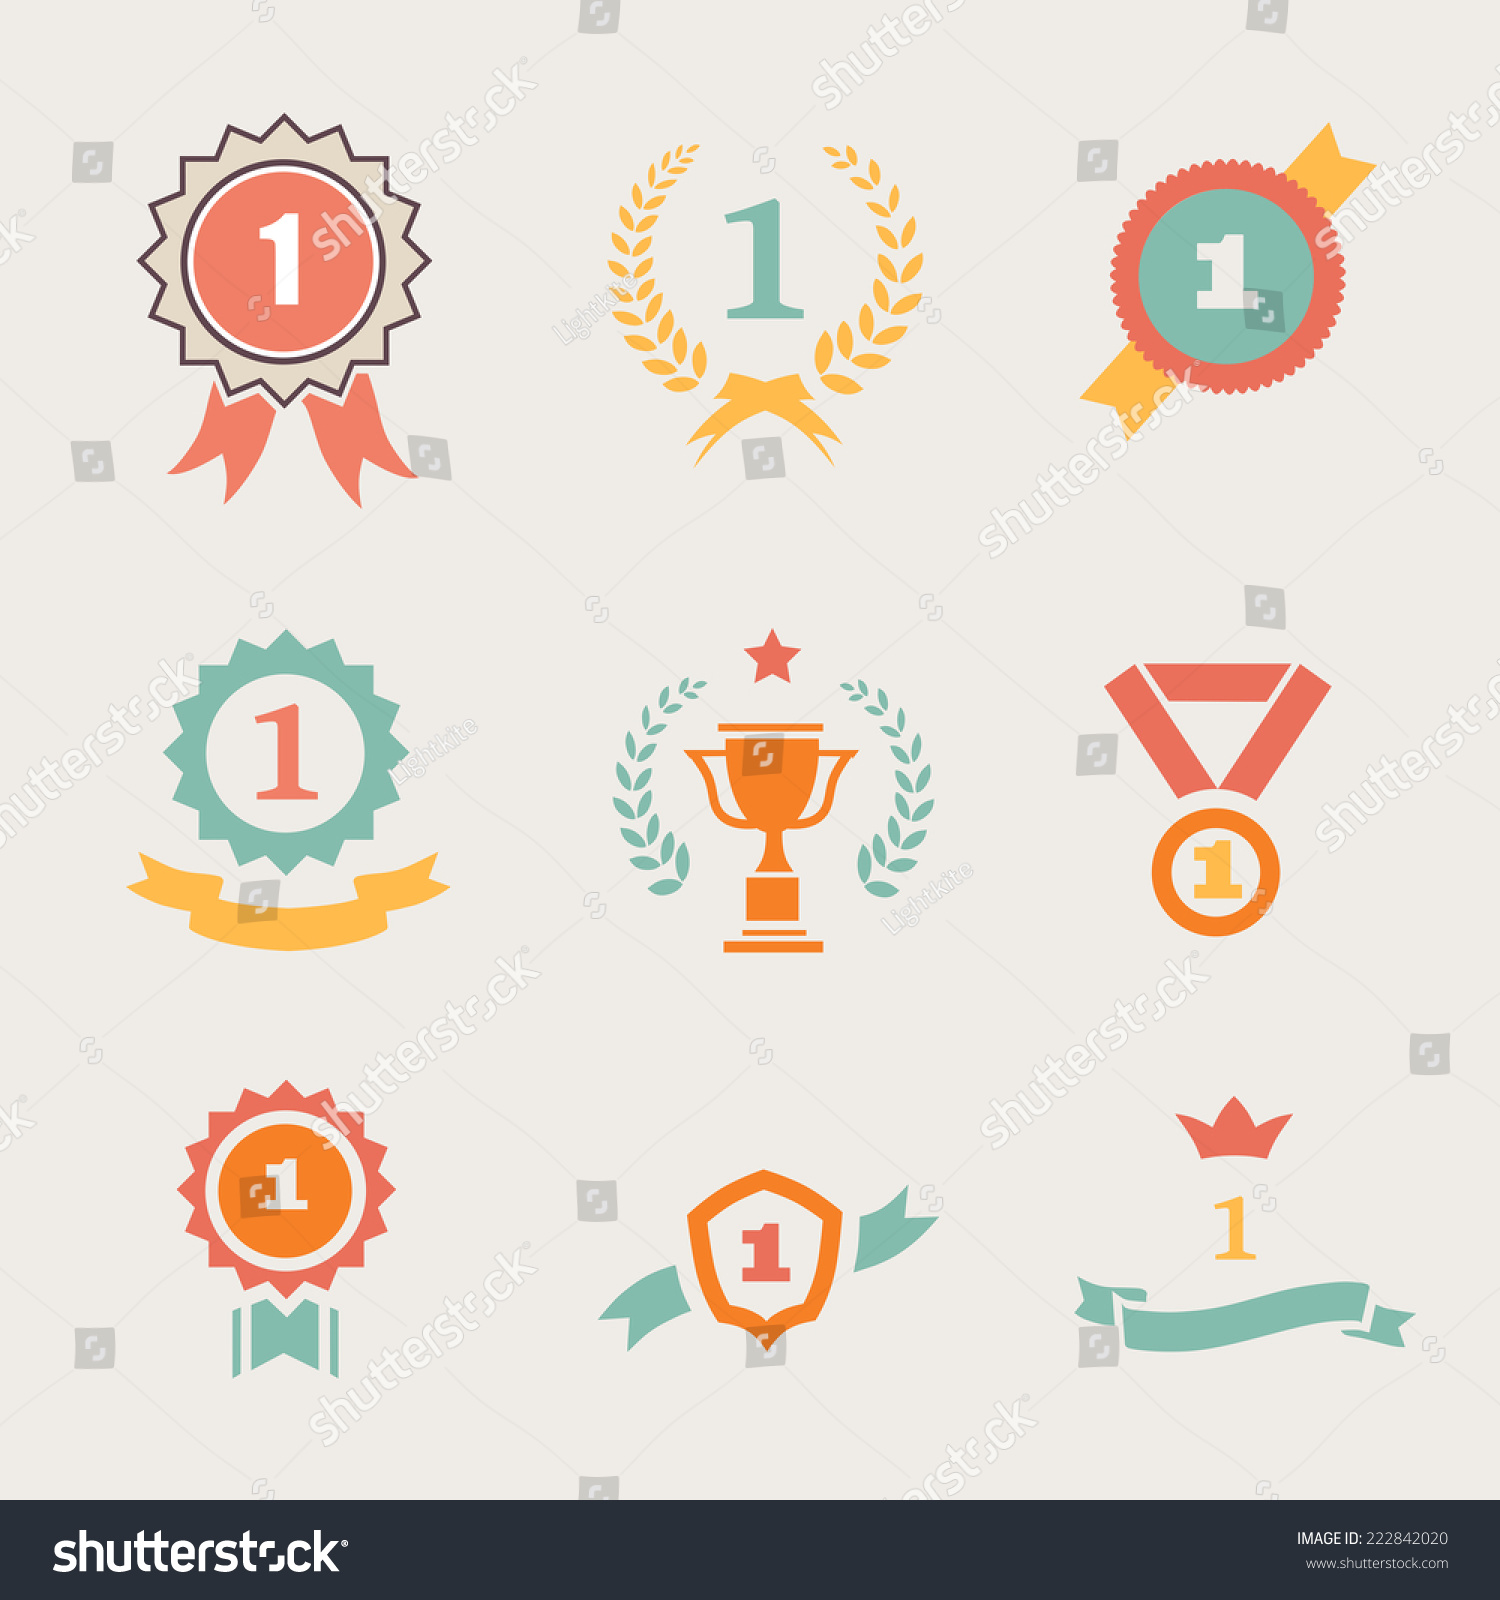 First Place Badges Ribbons Vector Illustration Stock Vector (Royalty ...